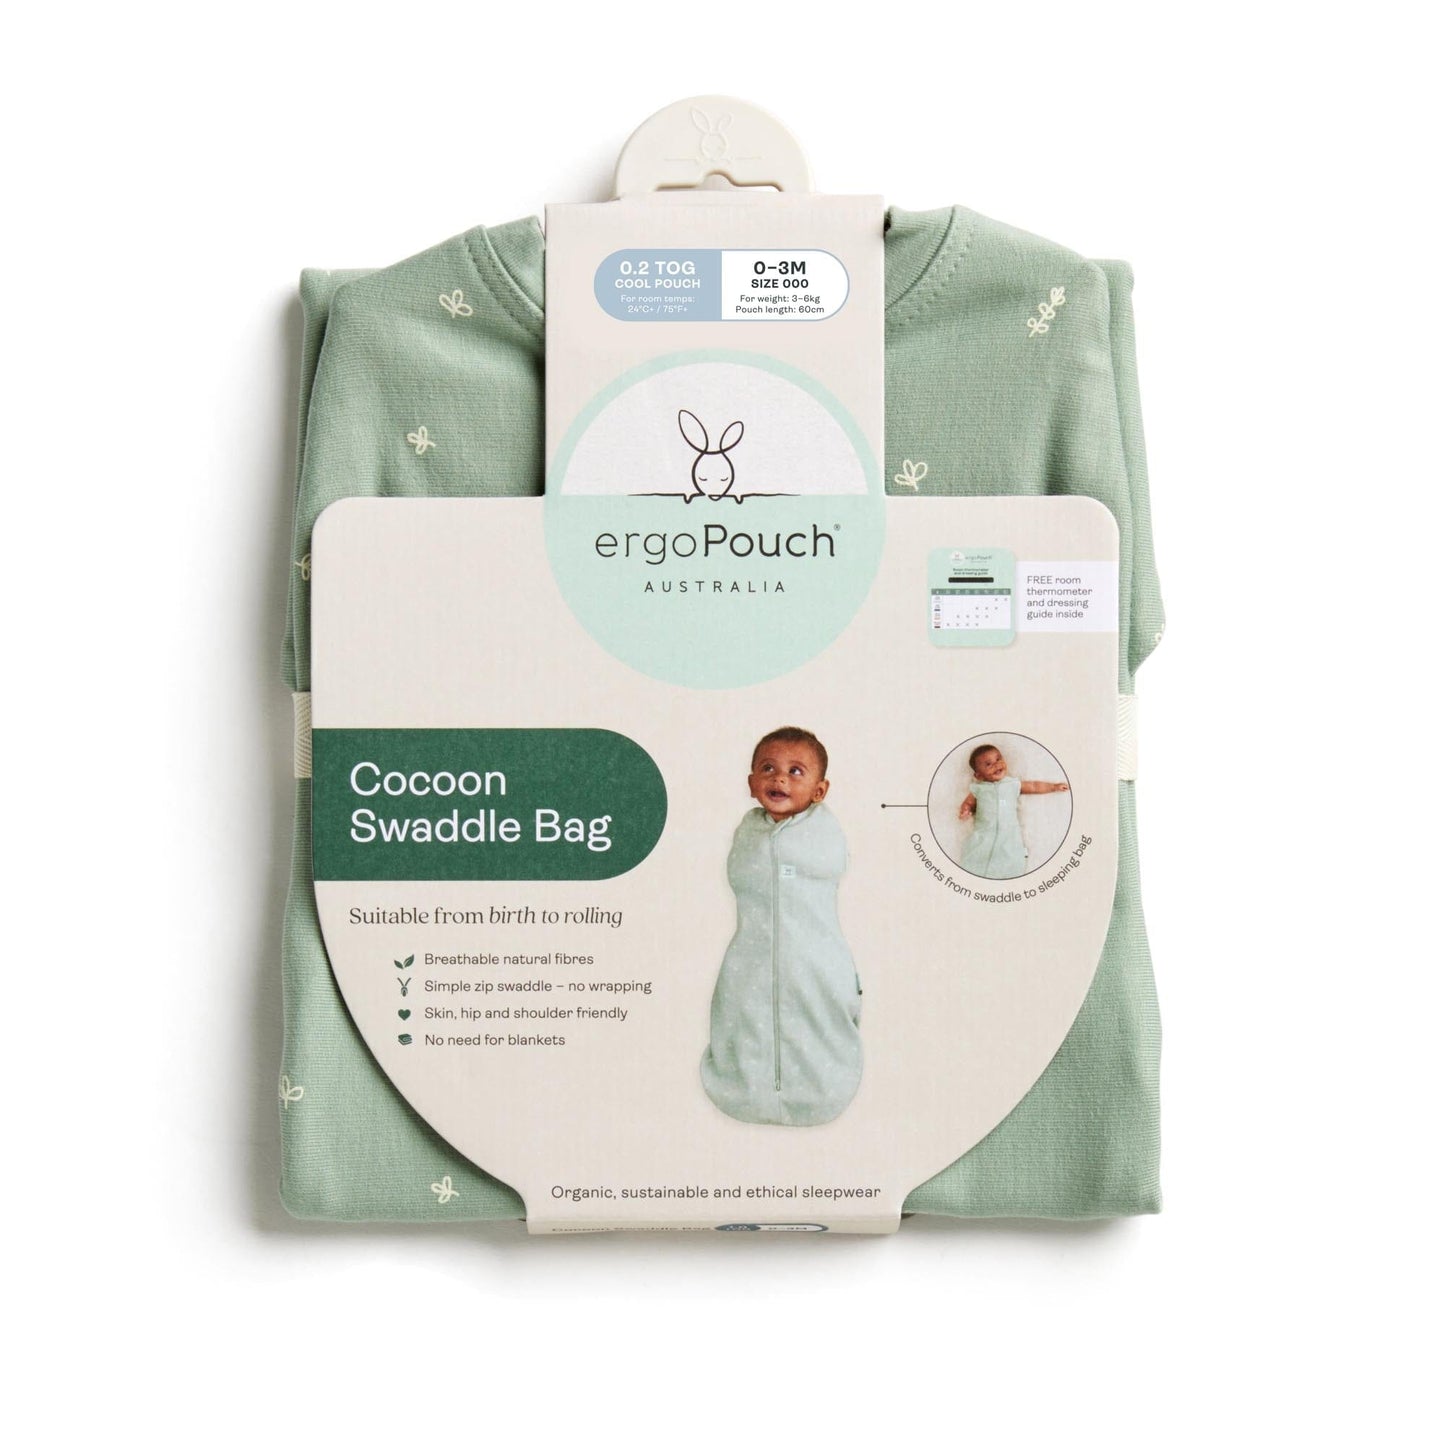 Cocoon Swaddle Bag 1.0 Tog For Baby By ergoPouch Critters